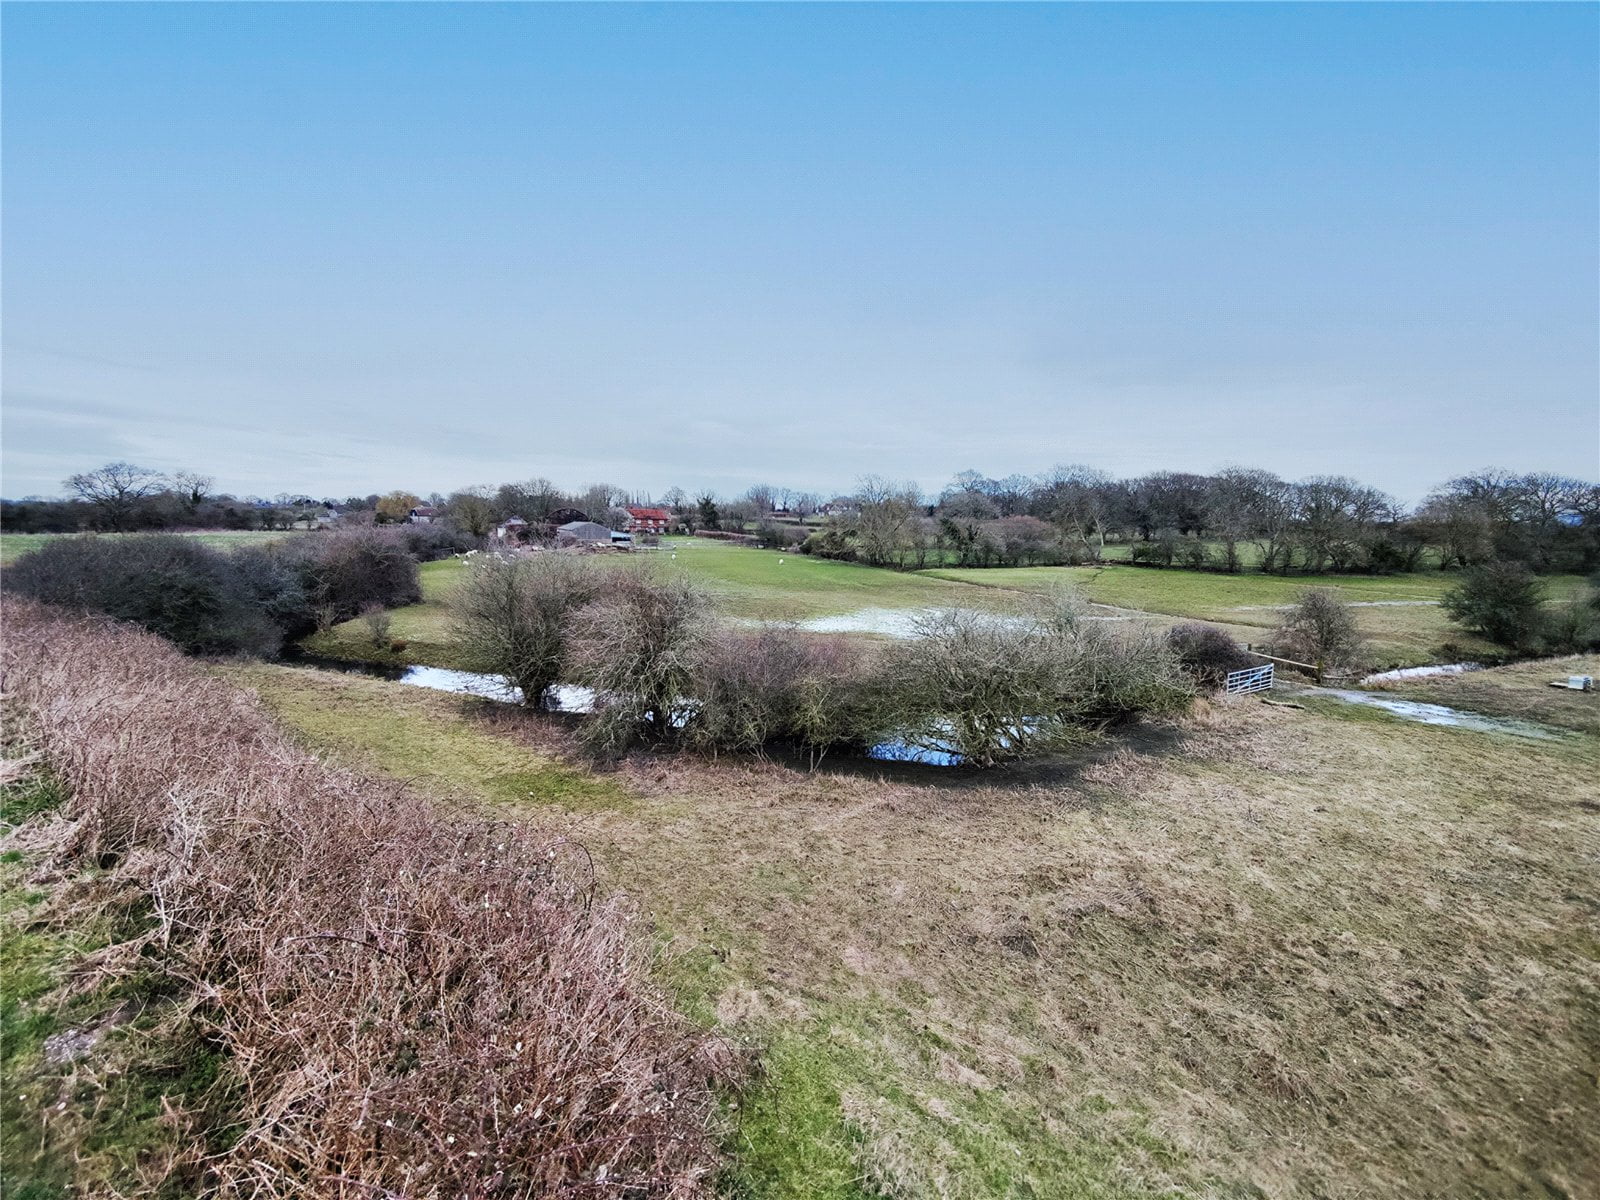 West End Lane, Henfield, West Sussex,  | residential-sales